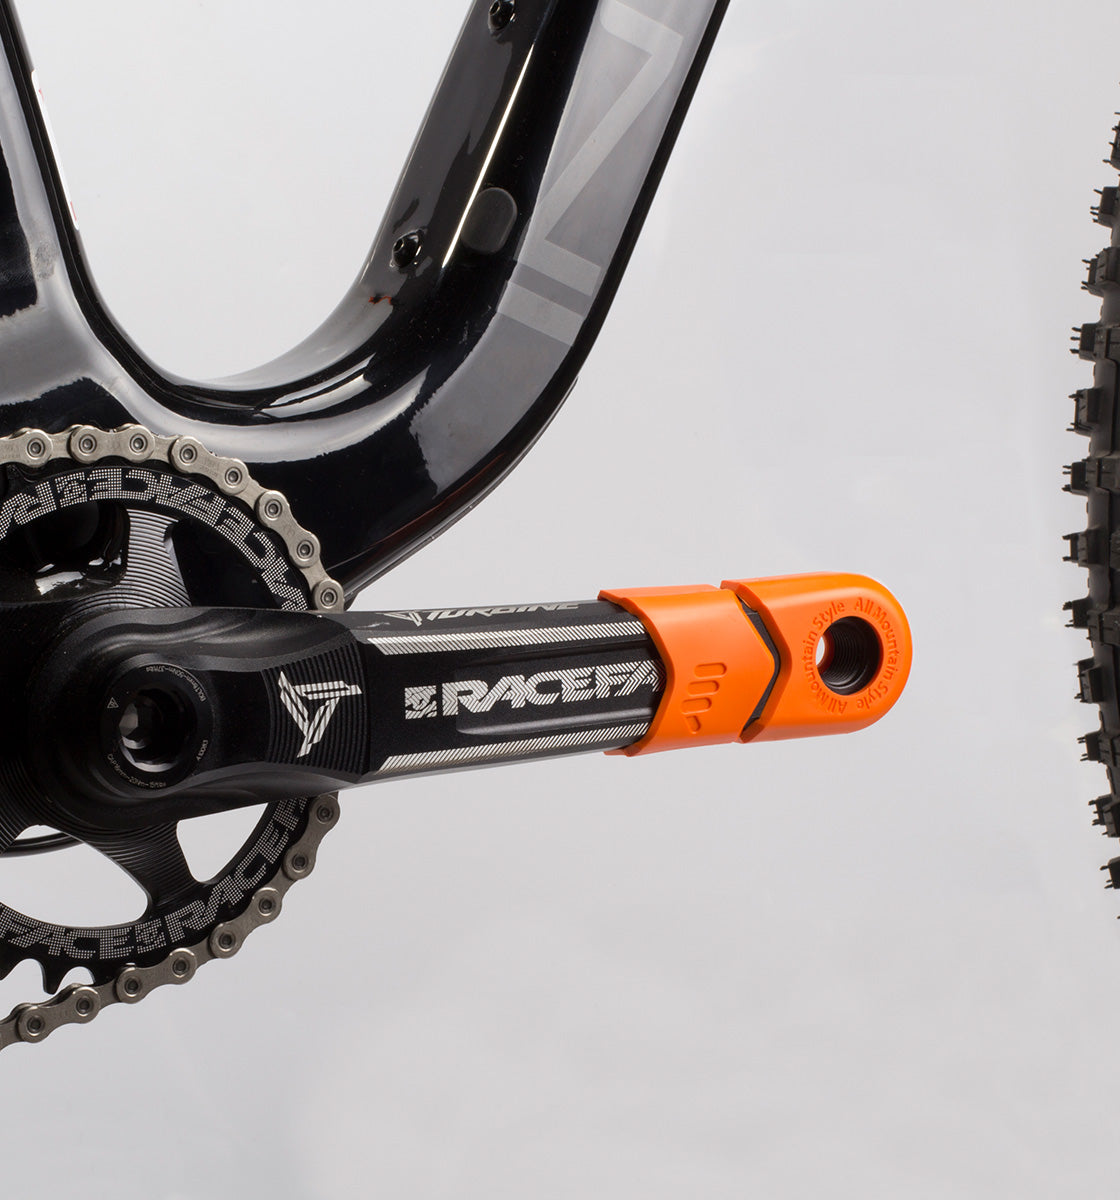 Top-Rated Crank Protections for your crankset